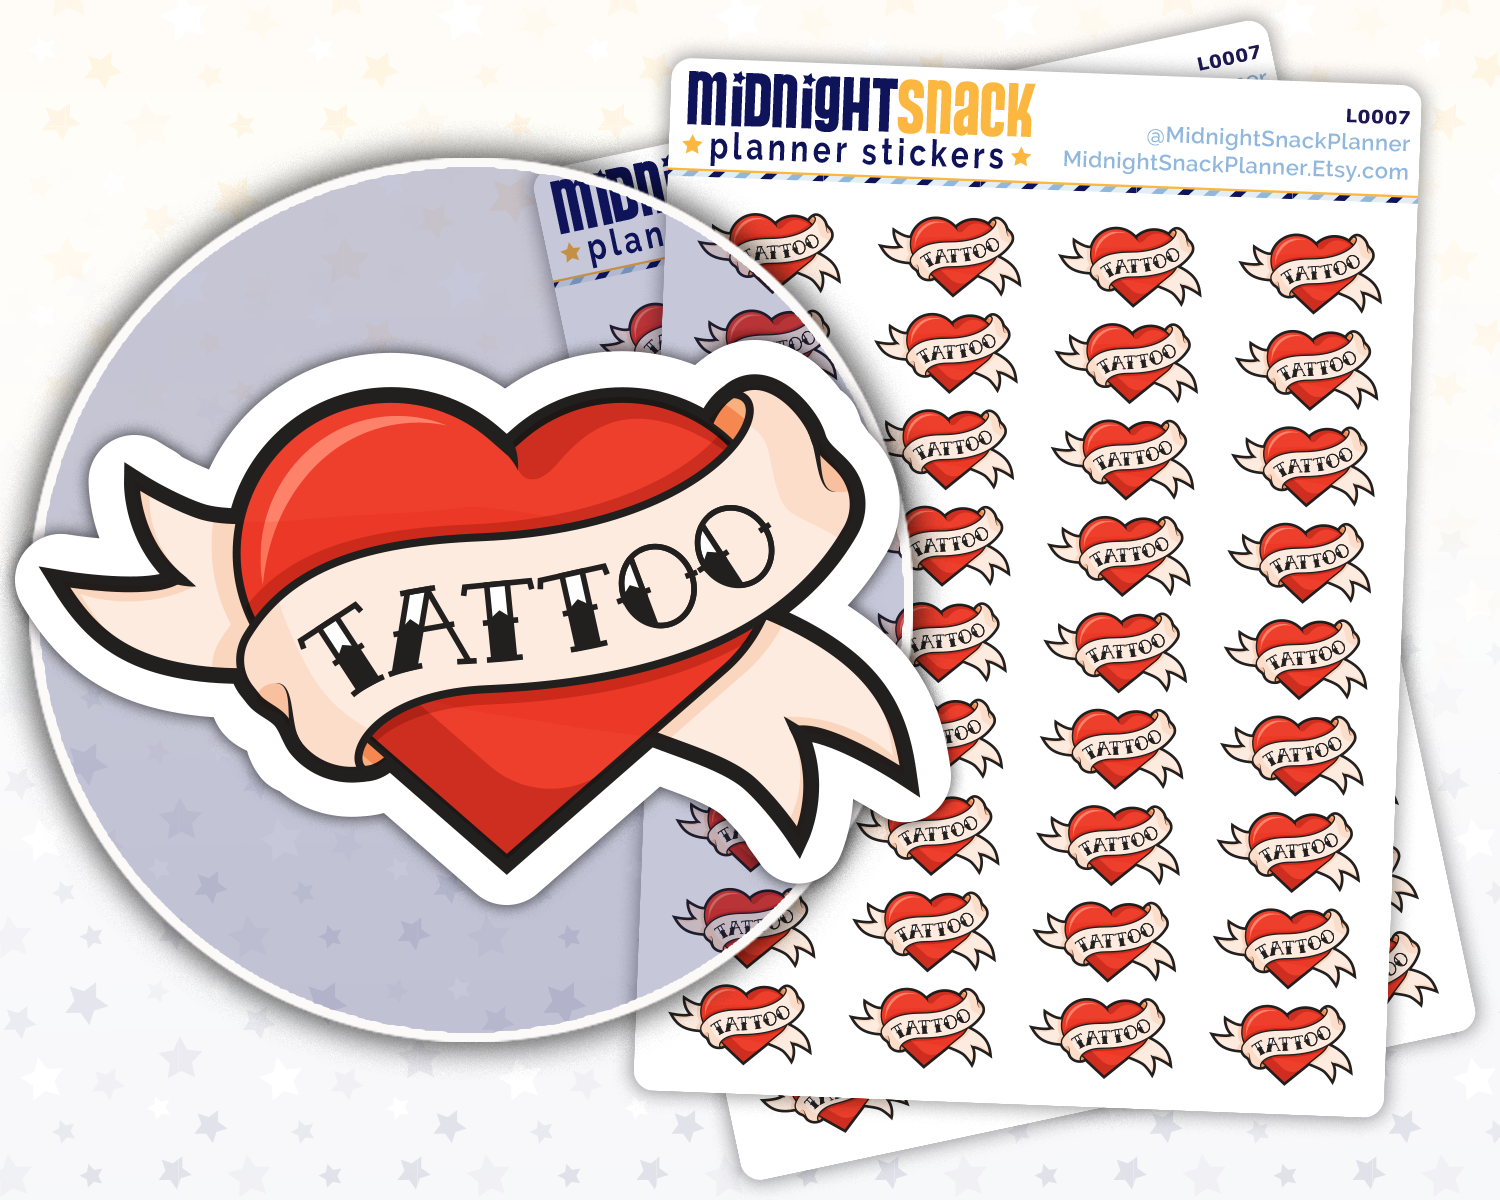 Tattoo Icon: Tattoo Appointment Planner Stickers Midnight Snack Planner